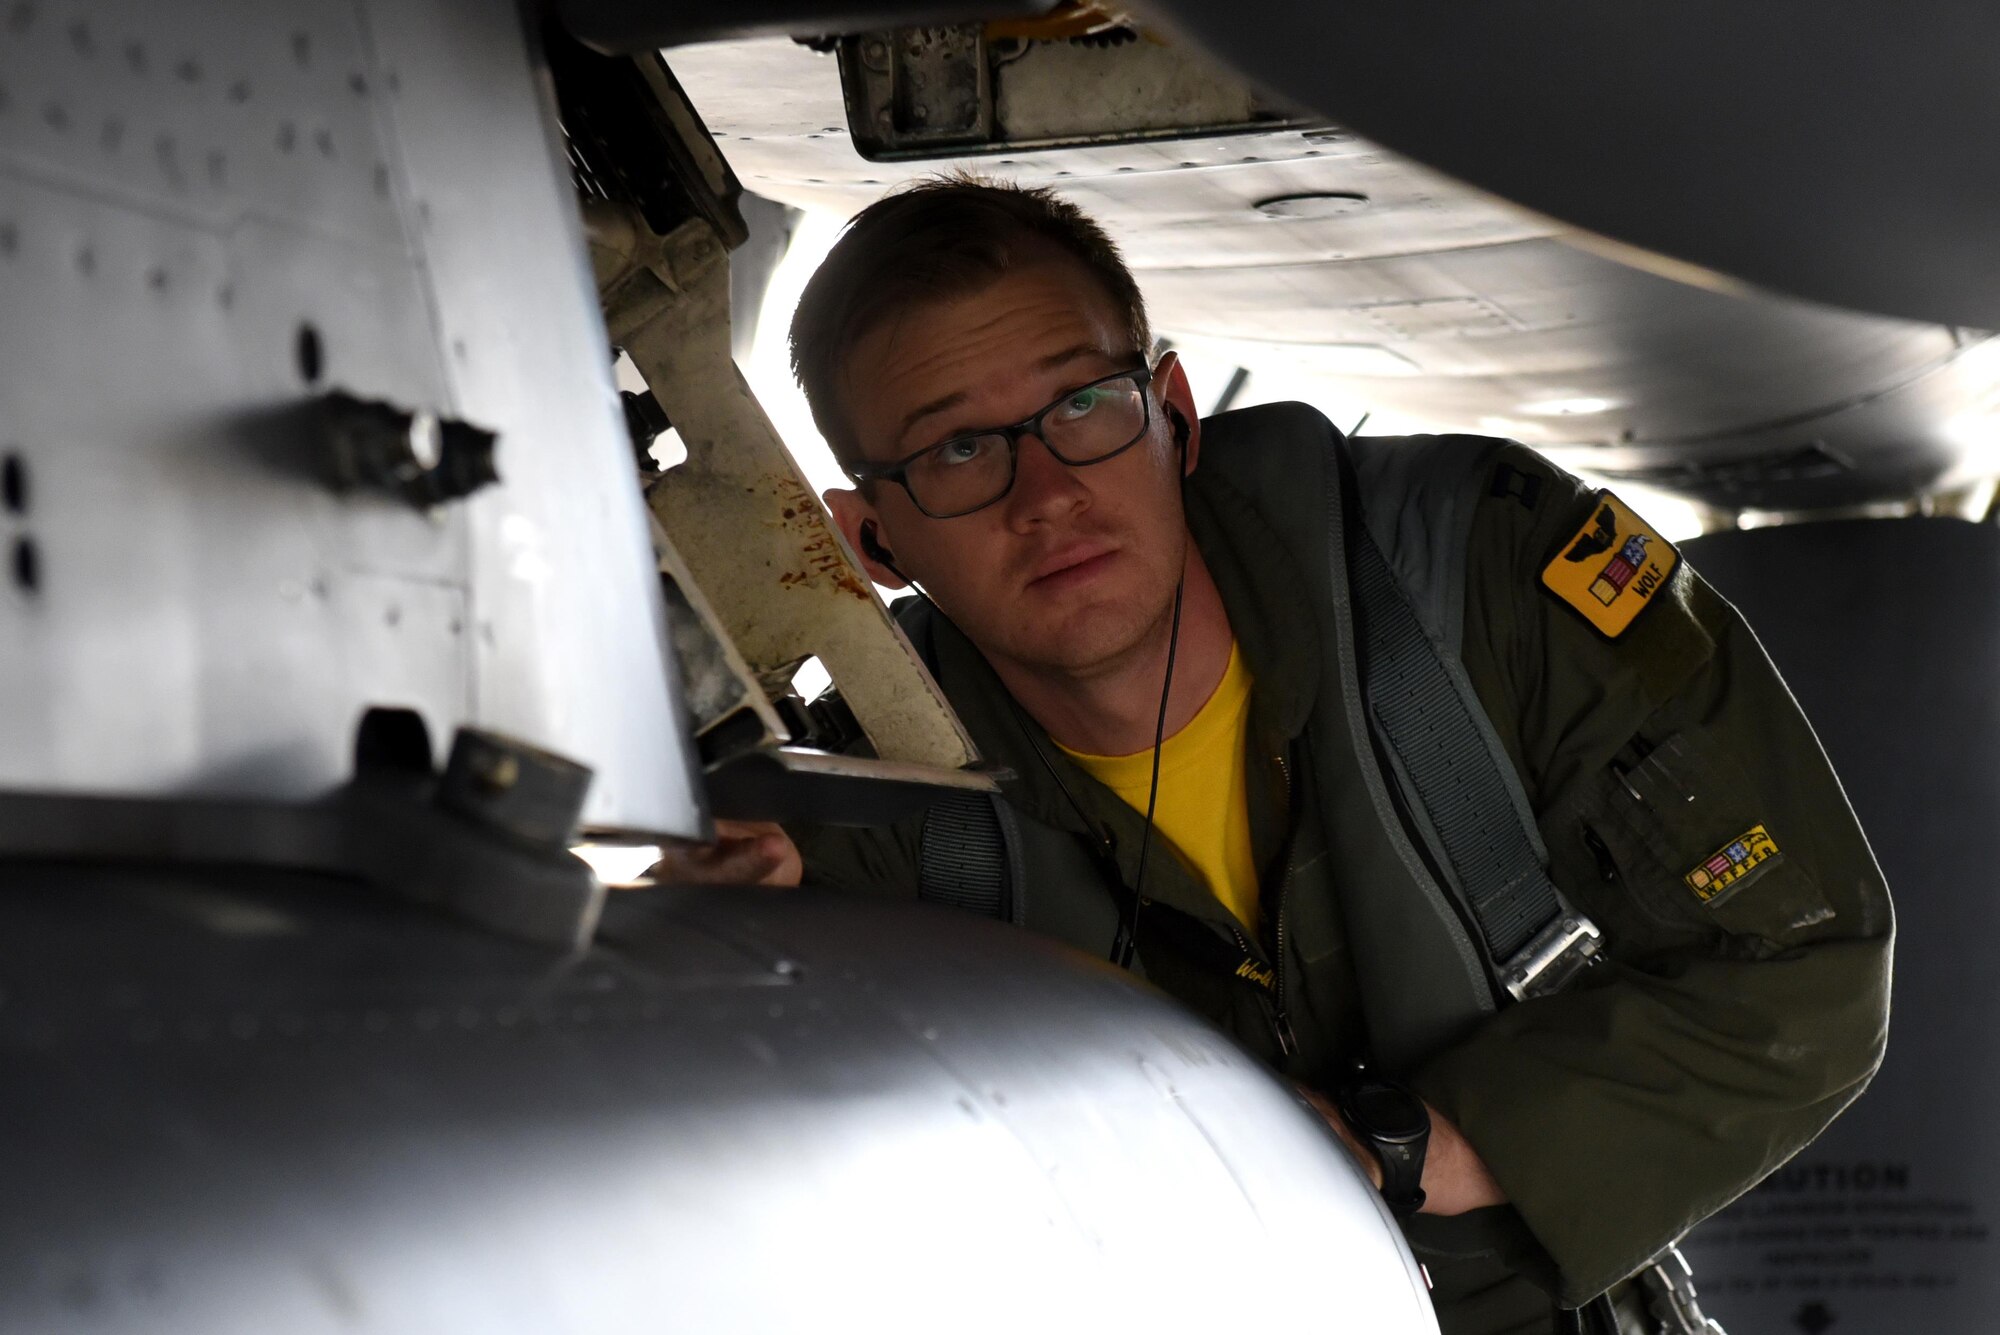 Capt. Michael D. Mosteller, 336th Fighter Squadron weapon systems officer, inspects an F-15E Strike Eagle, May 12, 2017, at Seymour Johnson Air Force Base, North Carolina. Mosteller inspected the Strike Eagle prior to taking off to participate in the monthly exercise Razor Talon. (U.S. Air Force photo by Airman 1st Class Victoria Boyton)